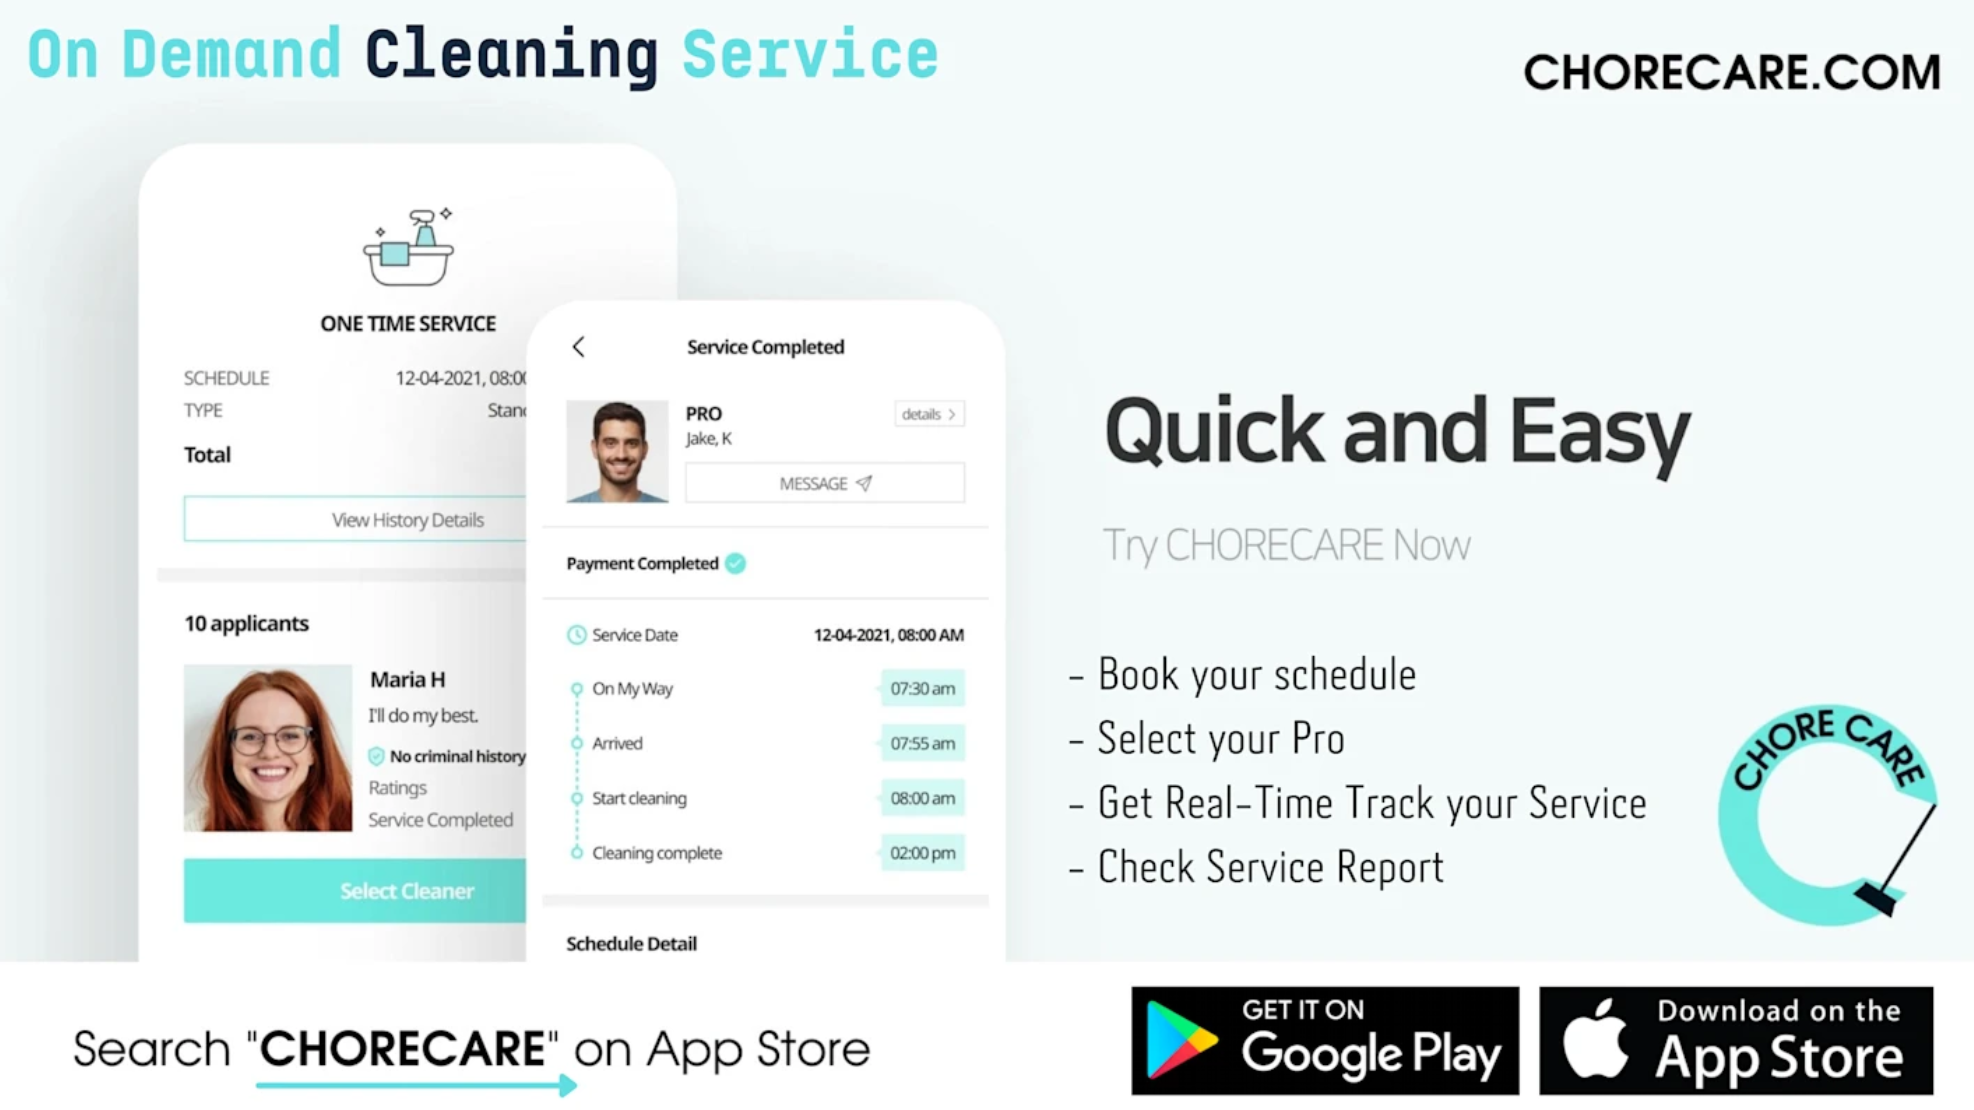 Chore Care Challenges The Status Quo With Their Online On-Demand Cleaning Services